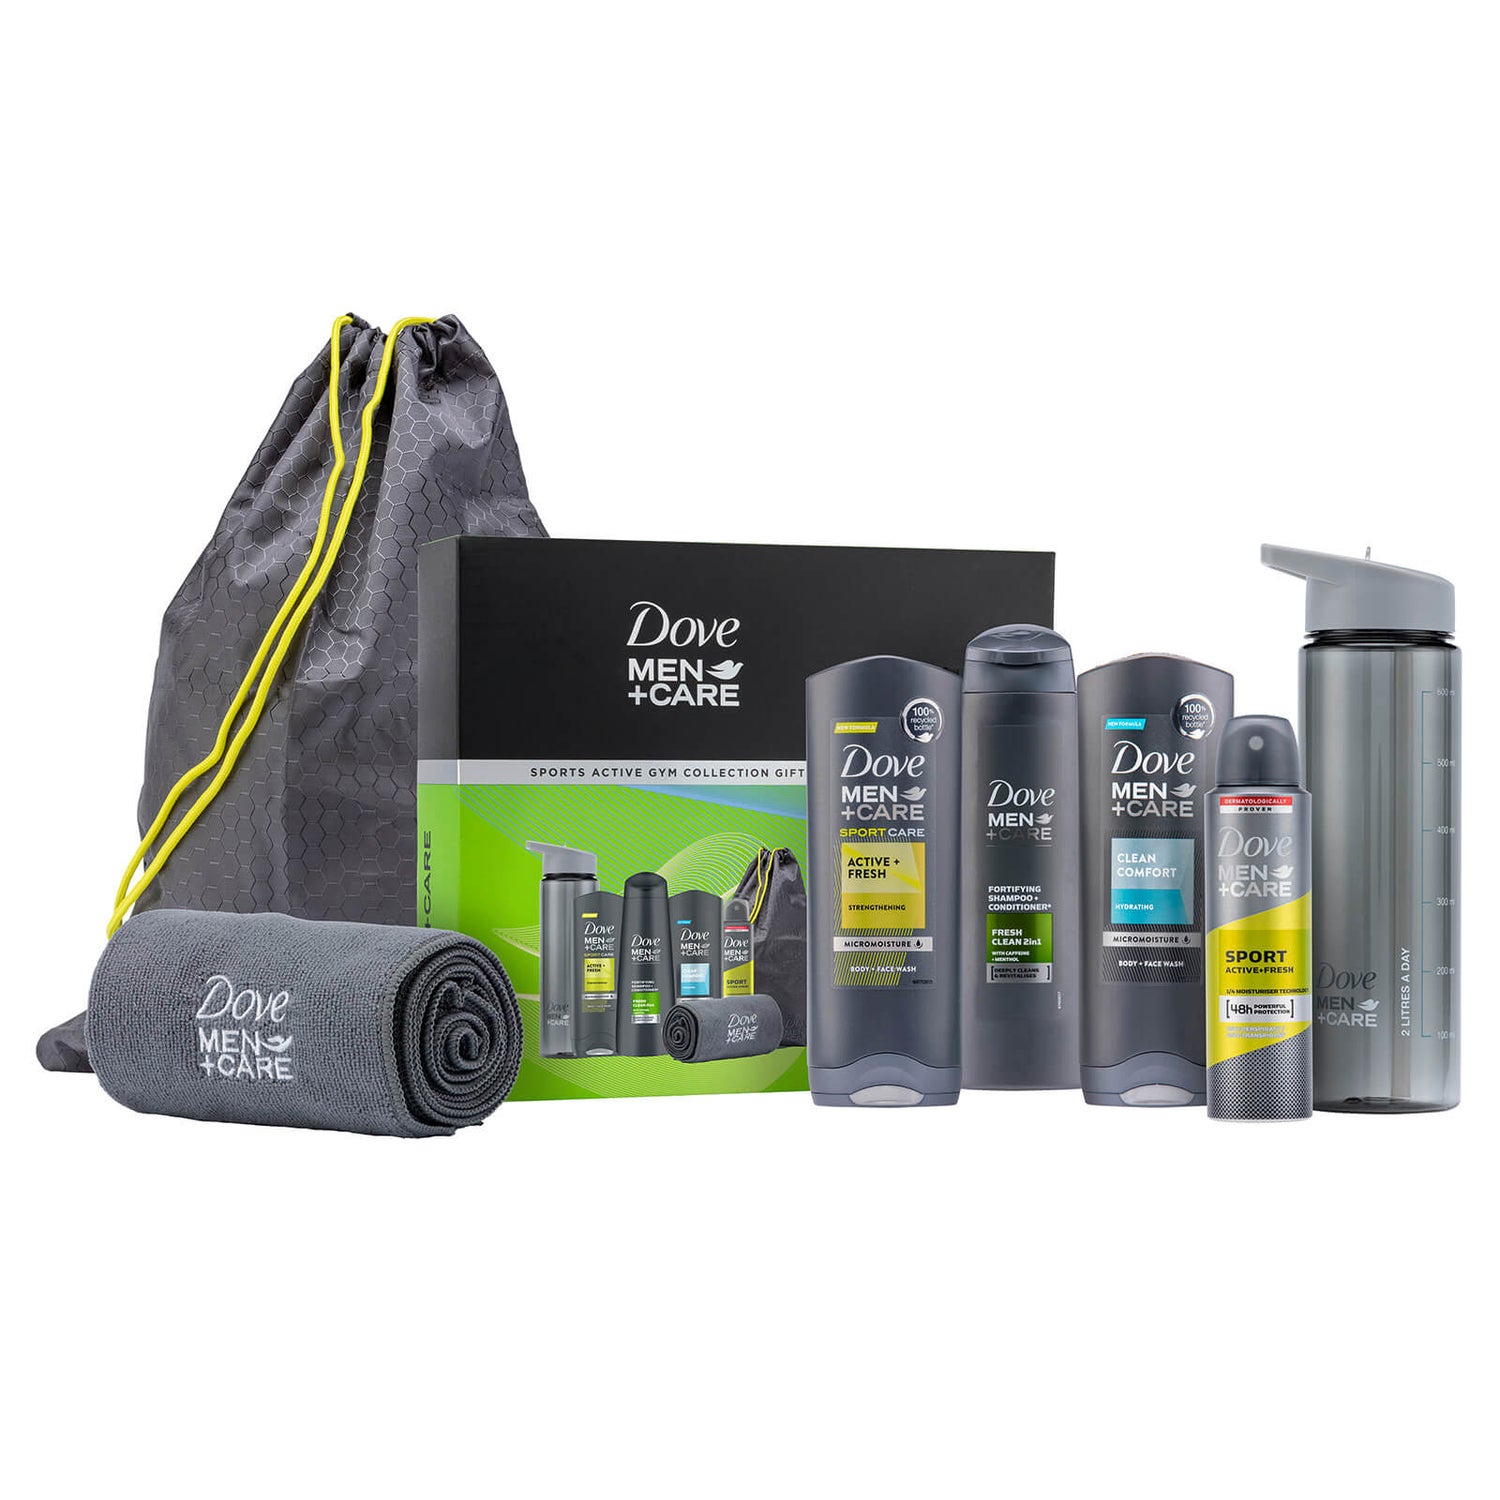 Dove Men+ Care Sports Active Complete Gym Collection